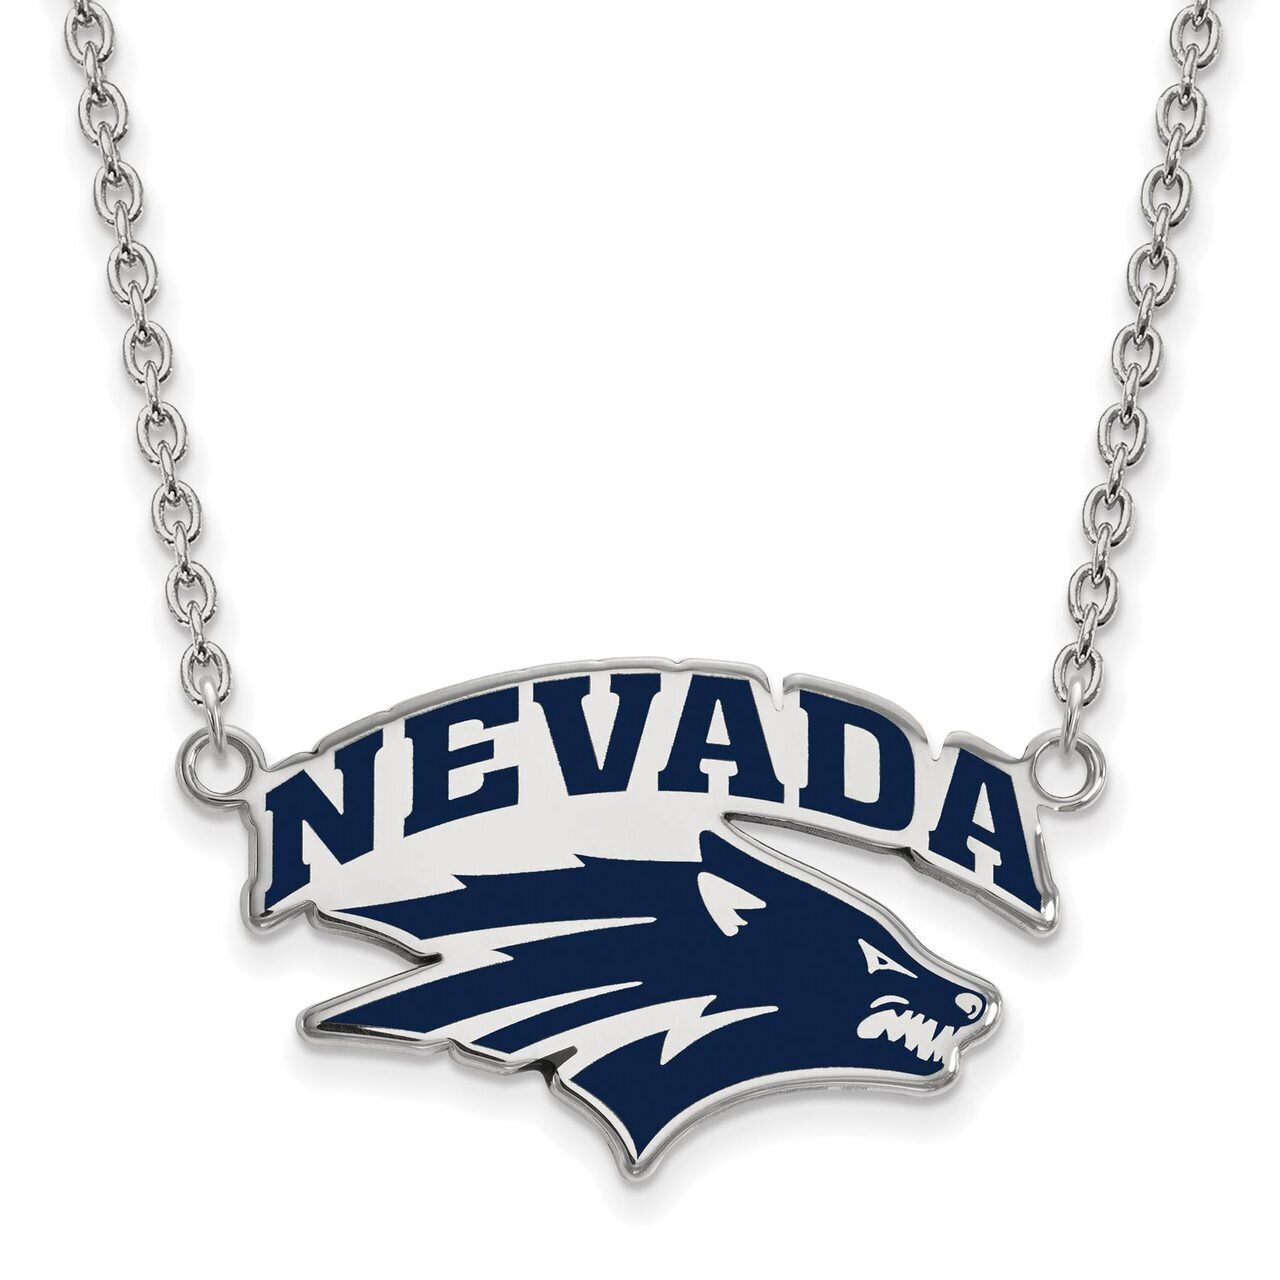 University of Nevada Large Enamel Pendant with Chain Necklace Sterling Silver SS010UNR-18